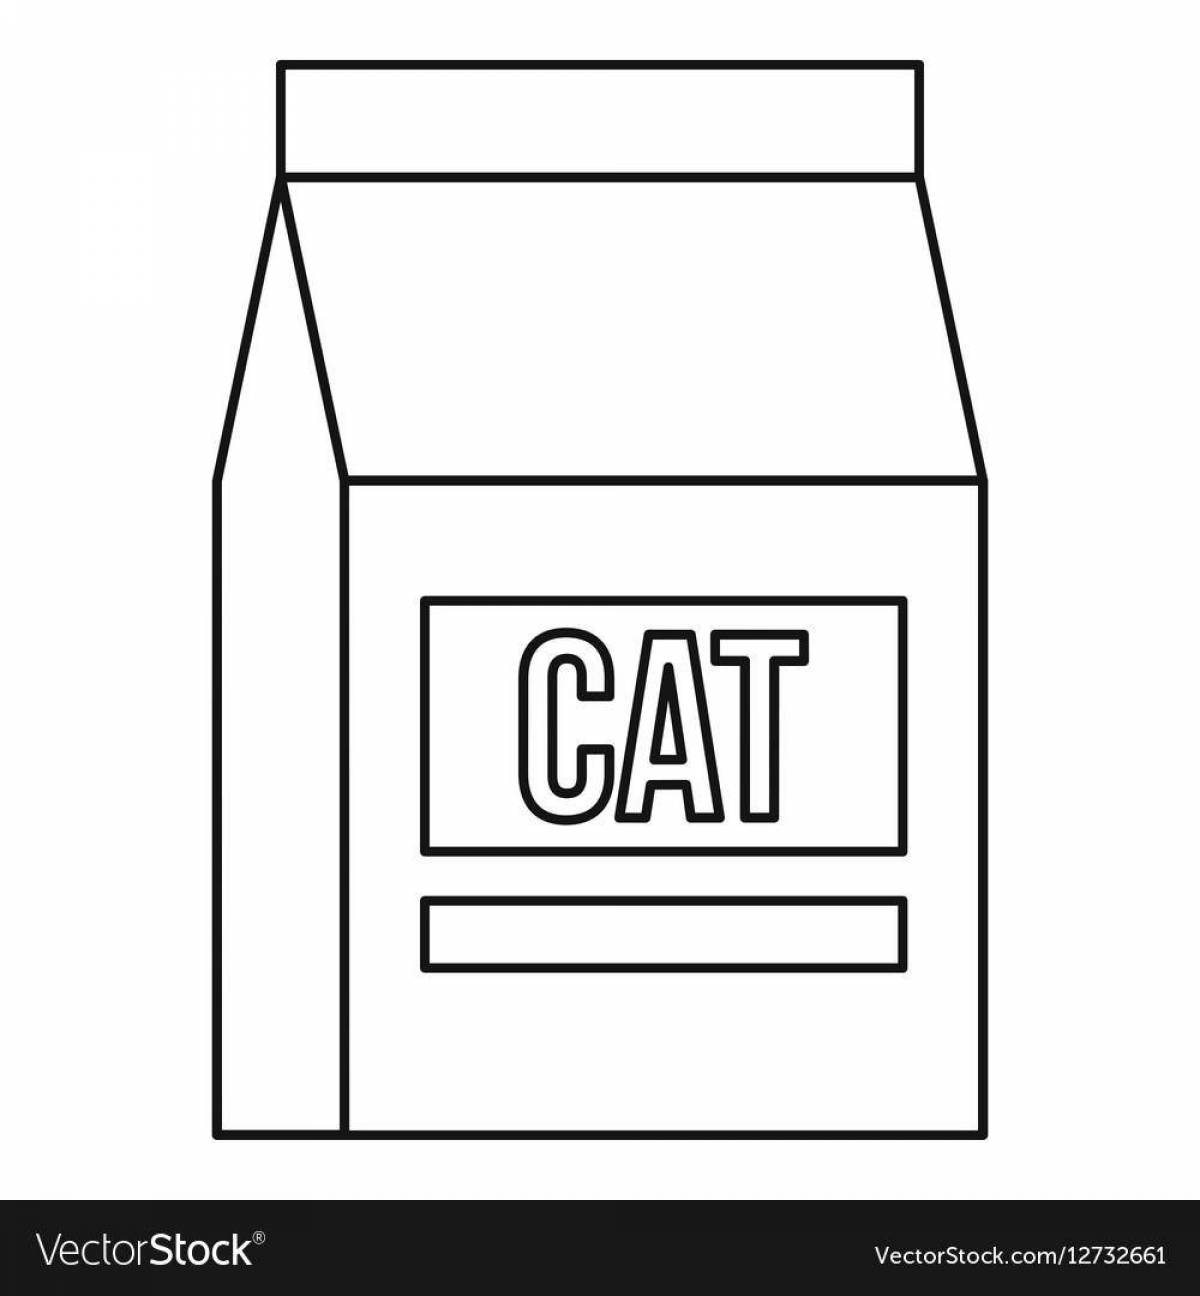 Impressive cat food coloring page